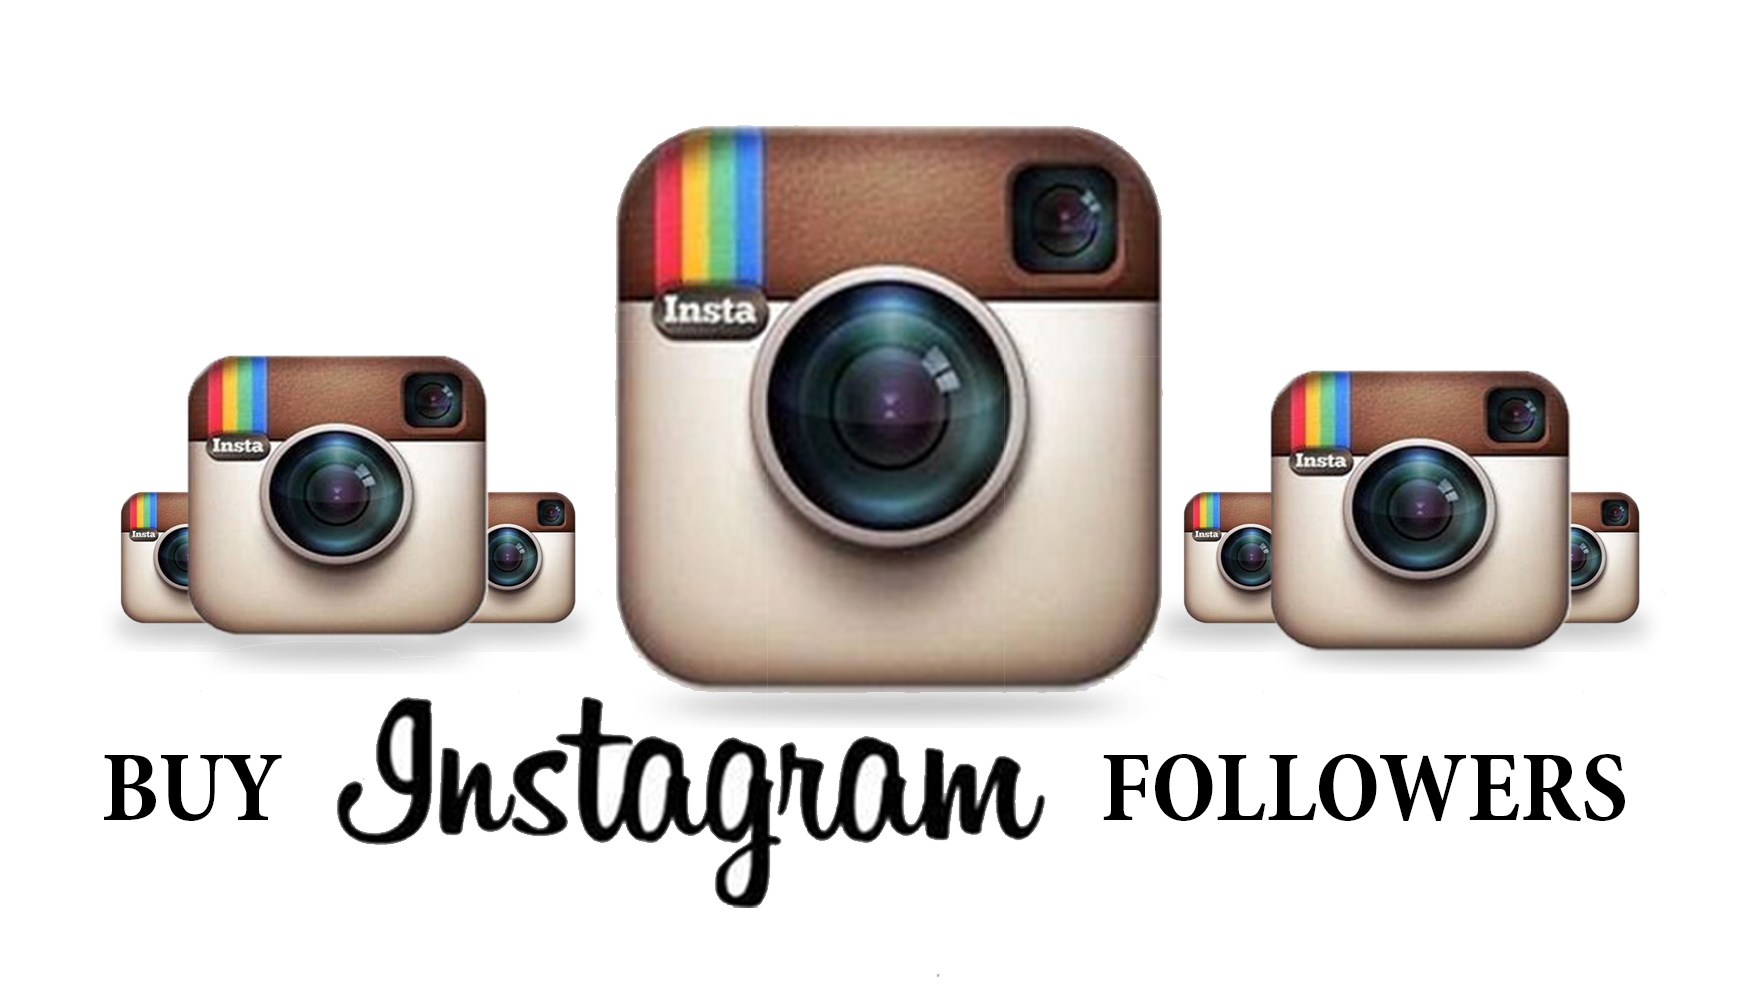 Free instagram followers without surveys or downloading apps